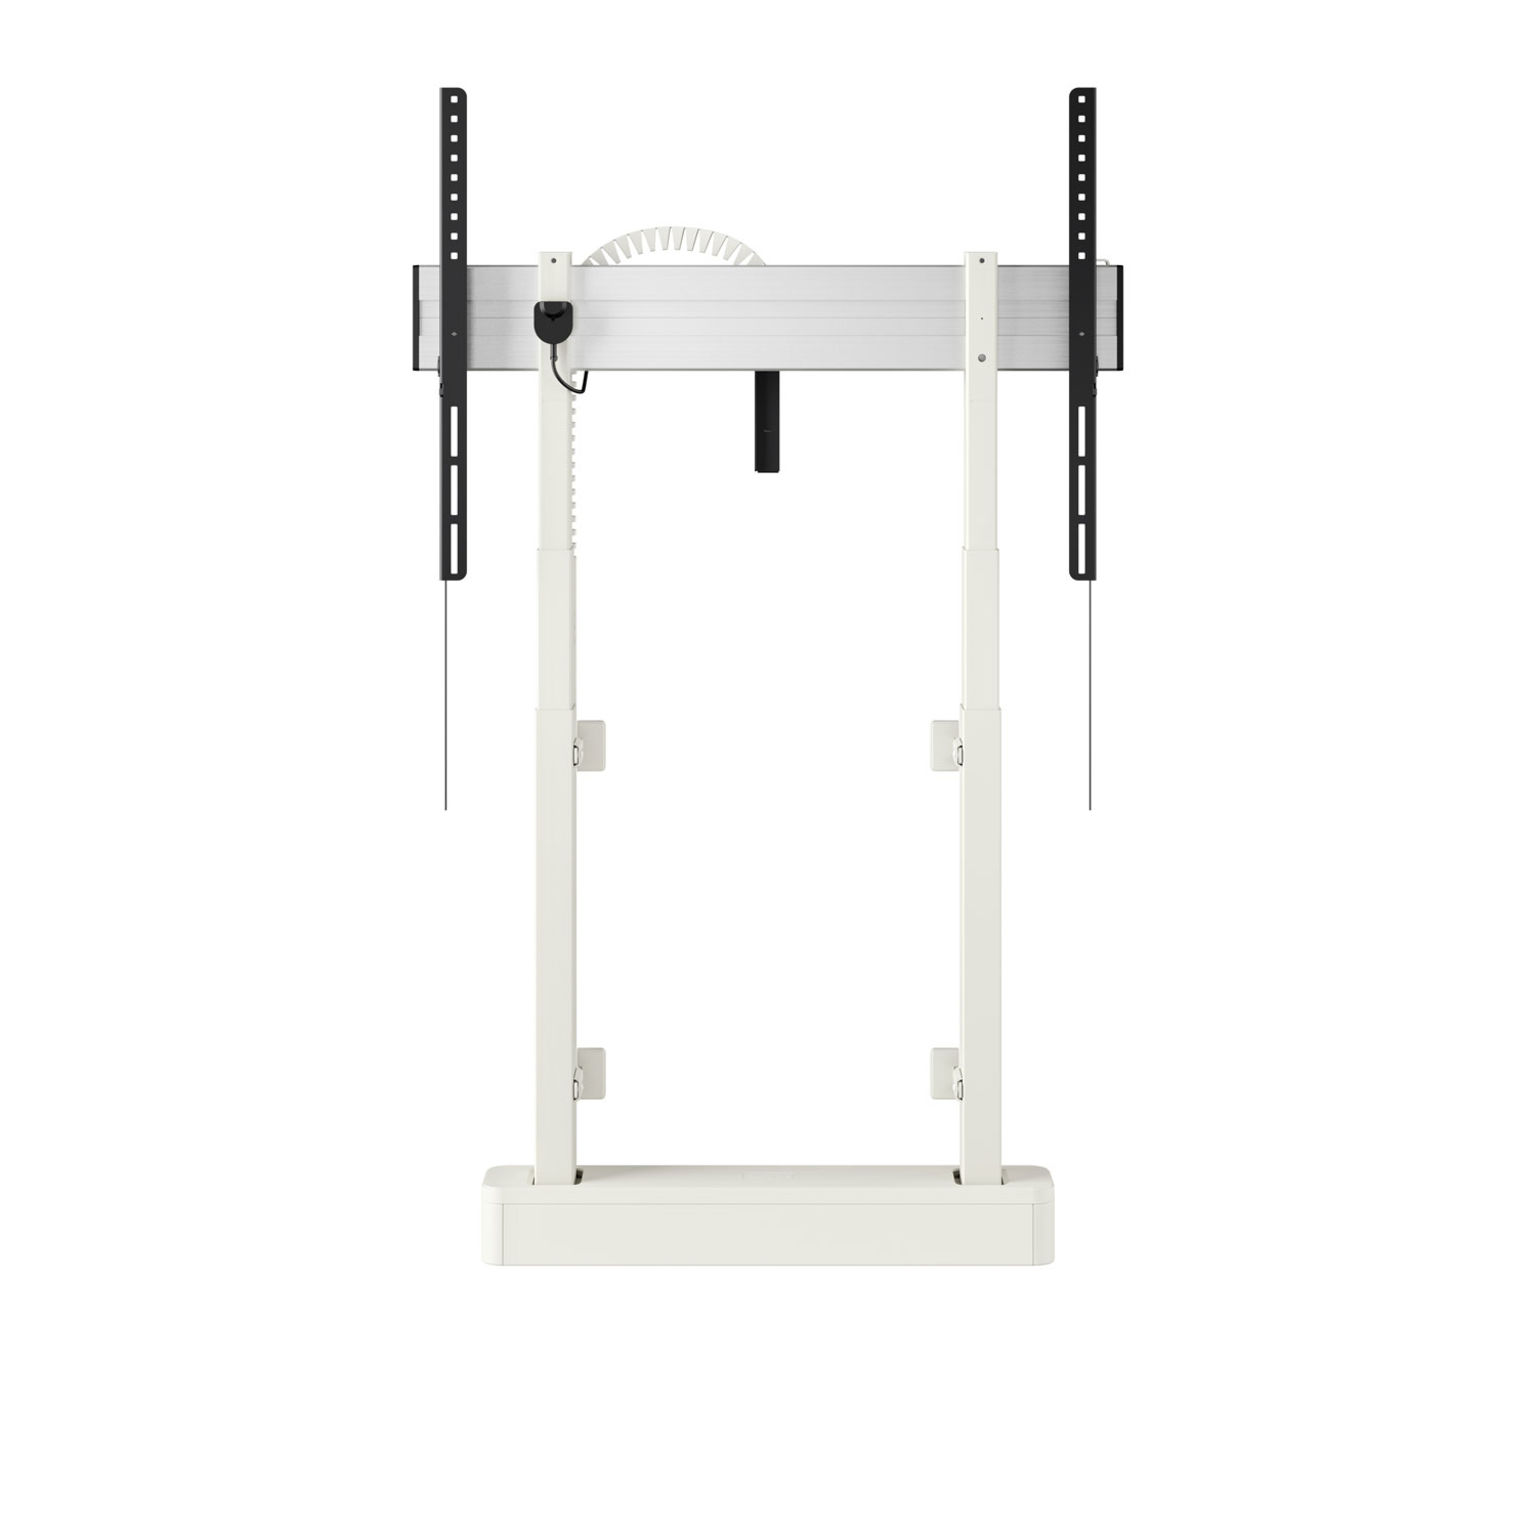 RISE 5308 Motorized display lift trolley